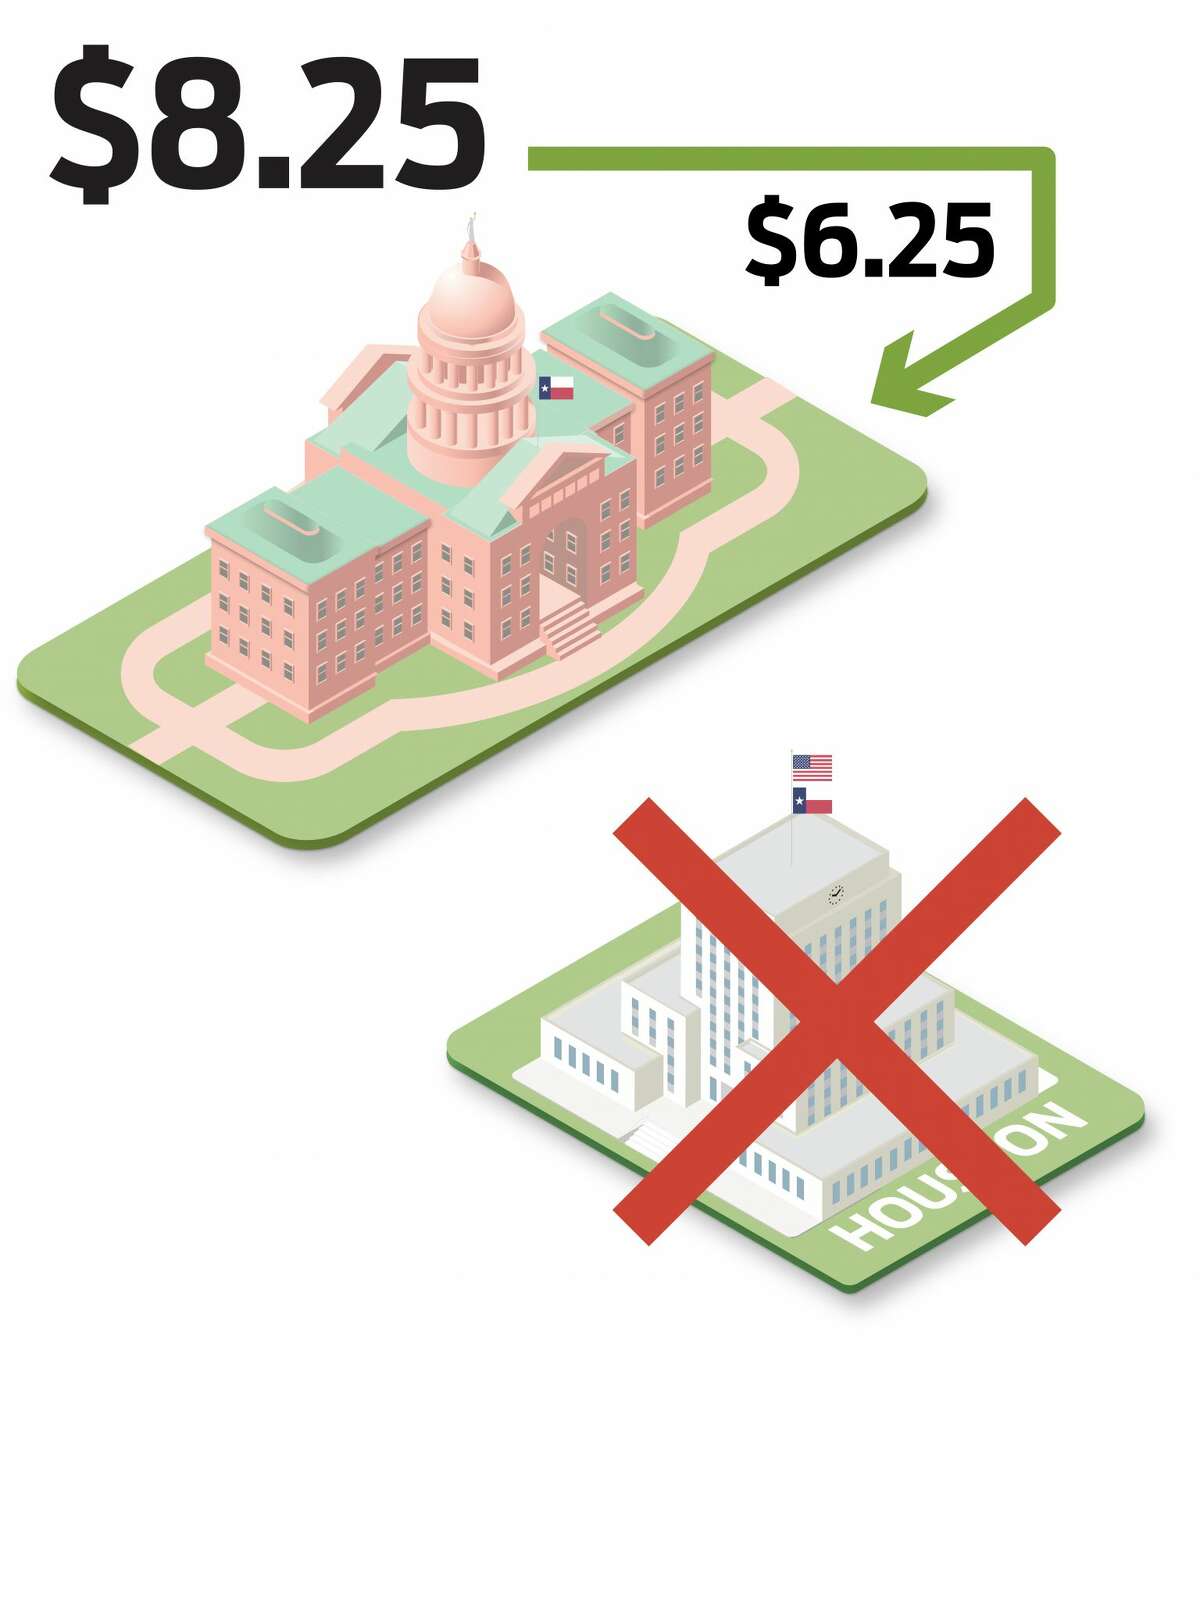 A diagram: arrow pointing from $8.25 to Texas State Capitol. Houston City Hall next to it, crossed out in red.